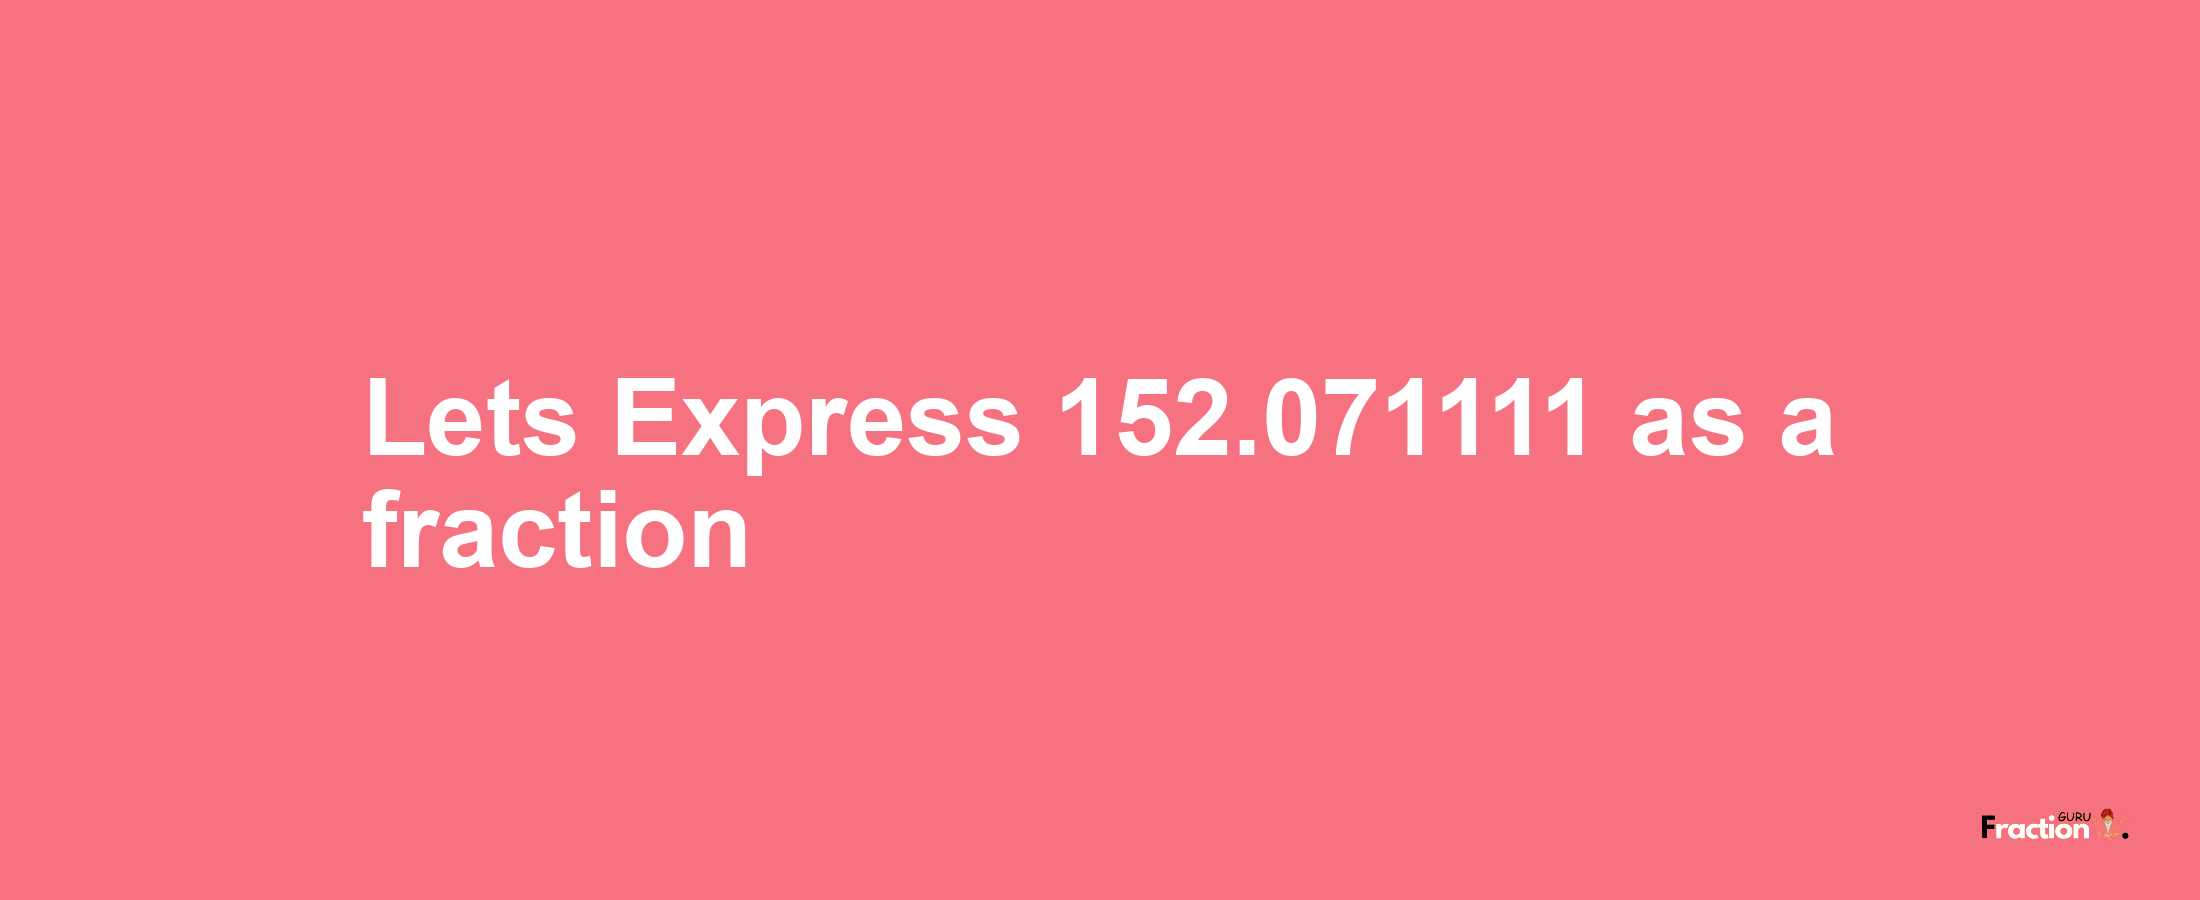 Lets Express 152.071111 as afraction